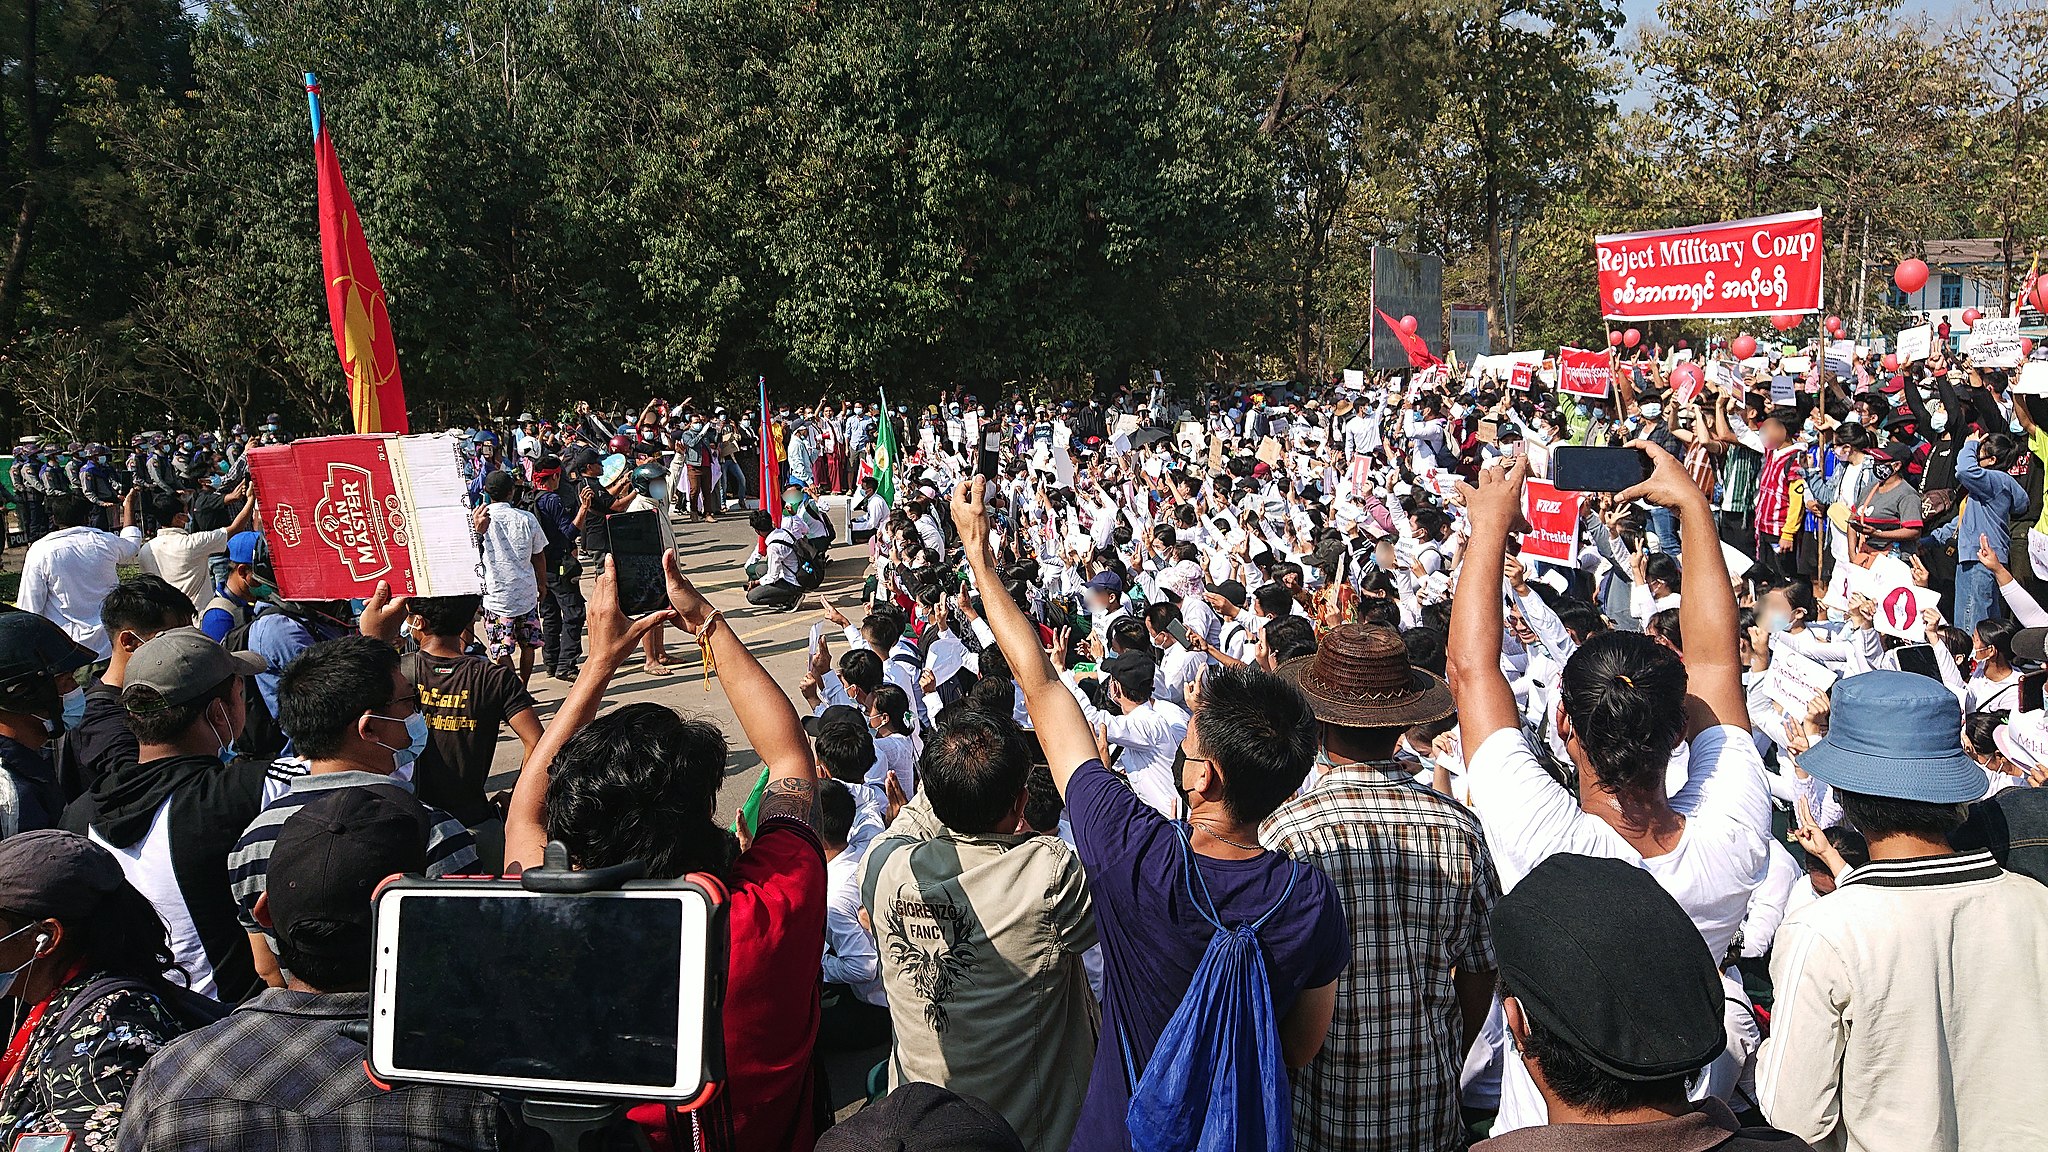 Demonstrators protest the military coup in Myanmar